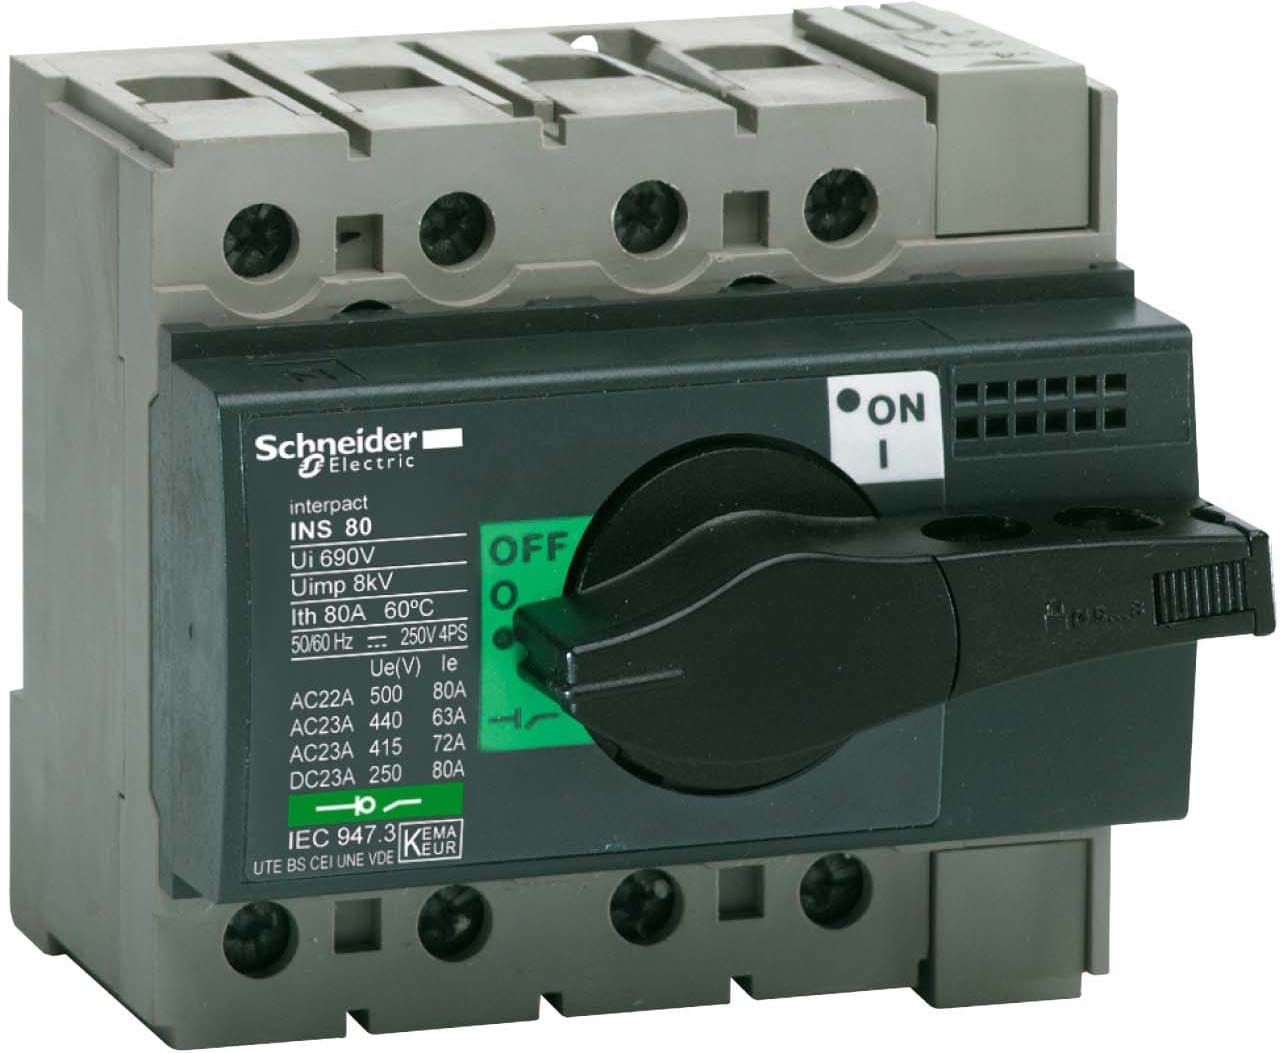 Schneider Electric - LASTBRYTER INS63 4P,  28903  INTERPACT 63A